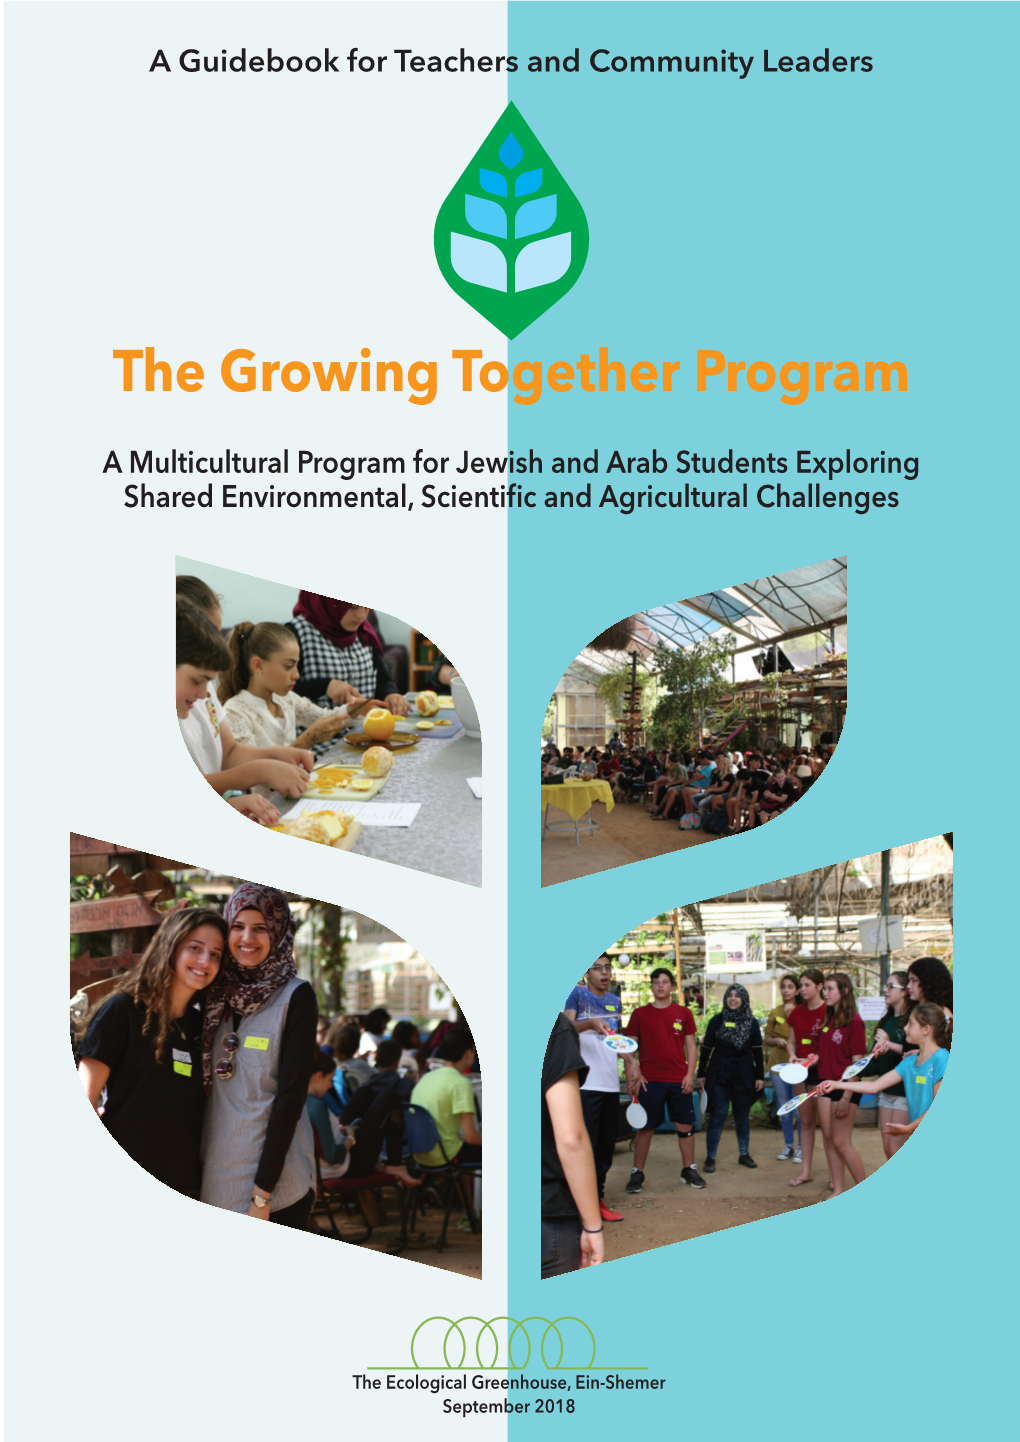 The Growing Together Program